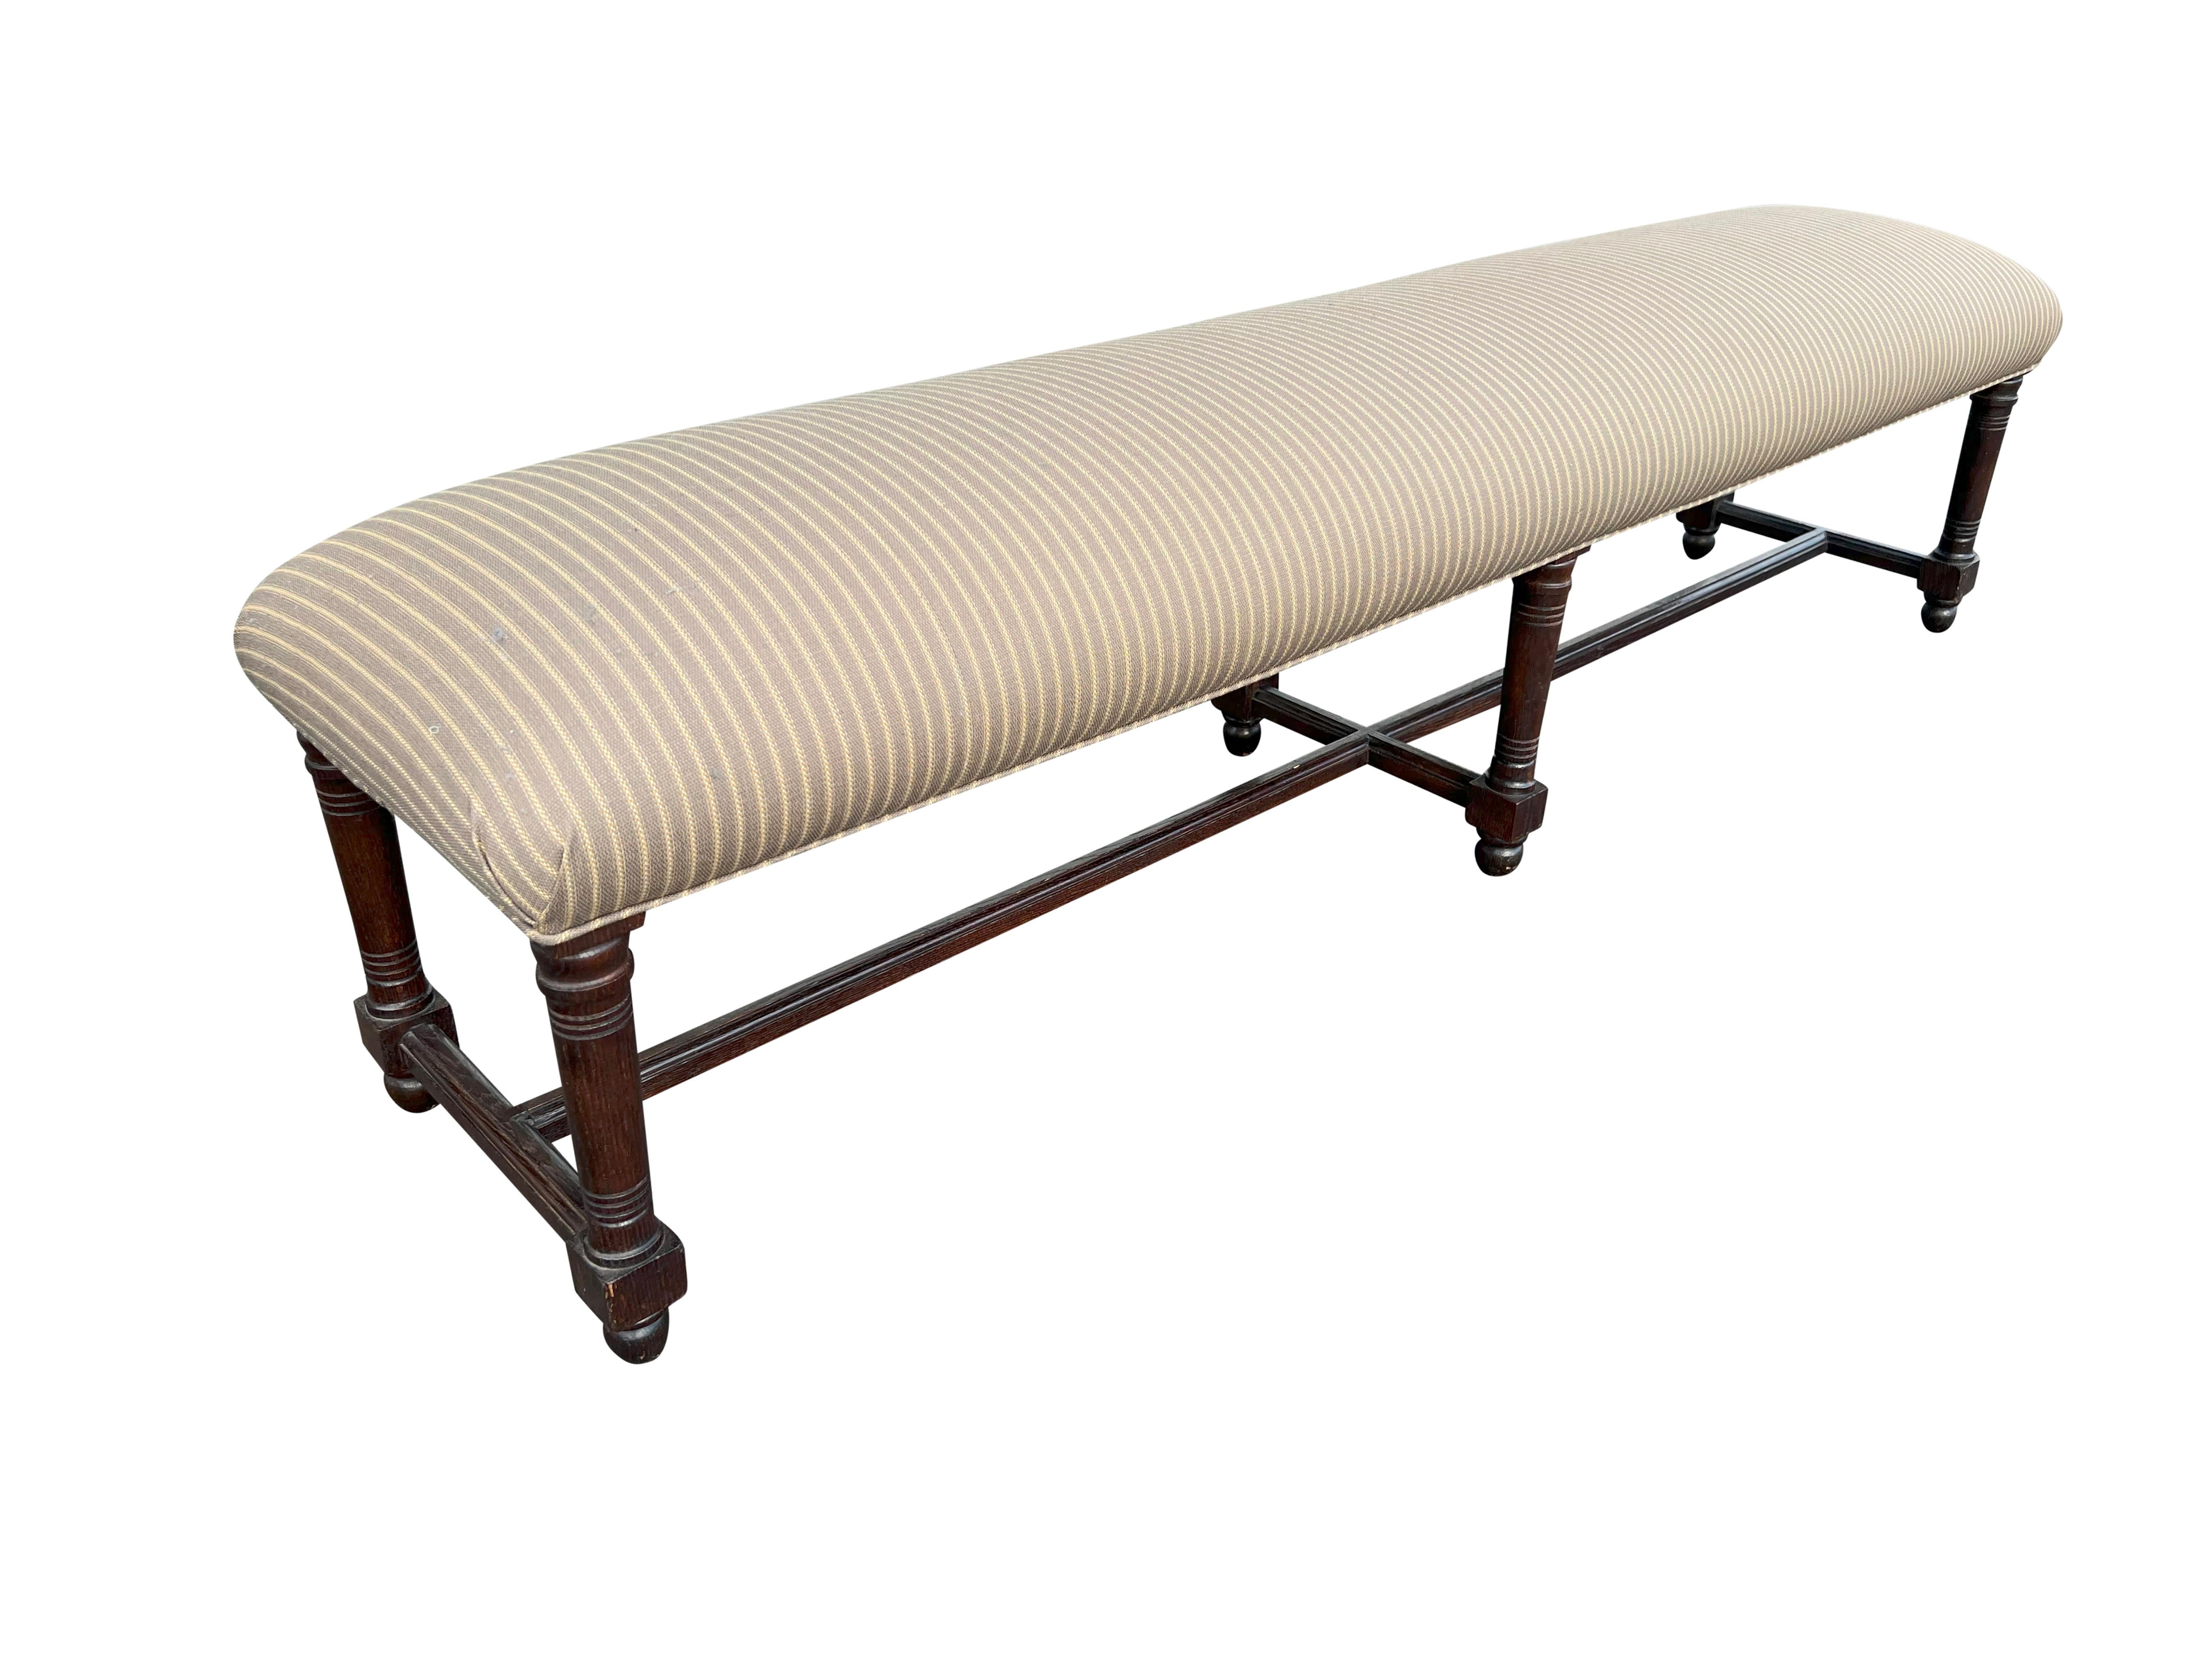 With an upholstered seat raised on turned legs joined by stretchers. Another is available.